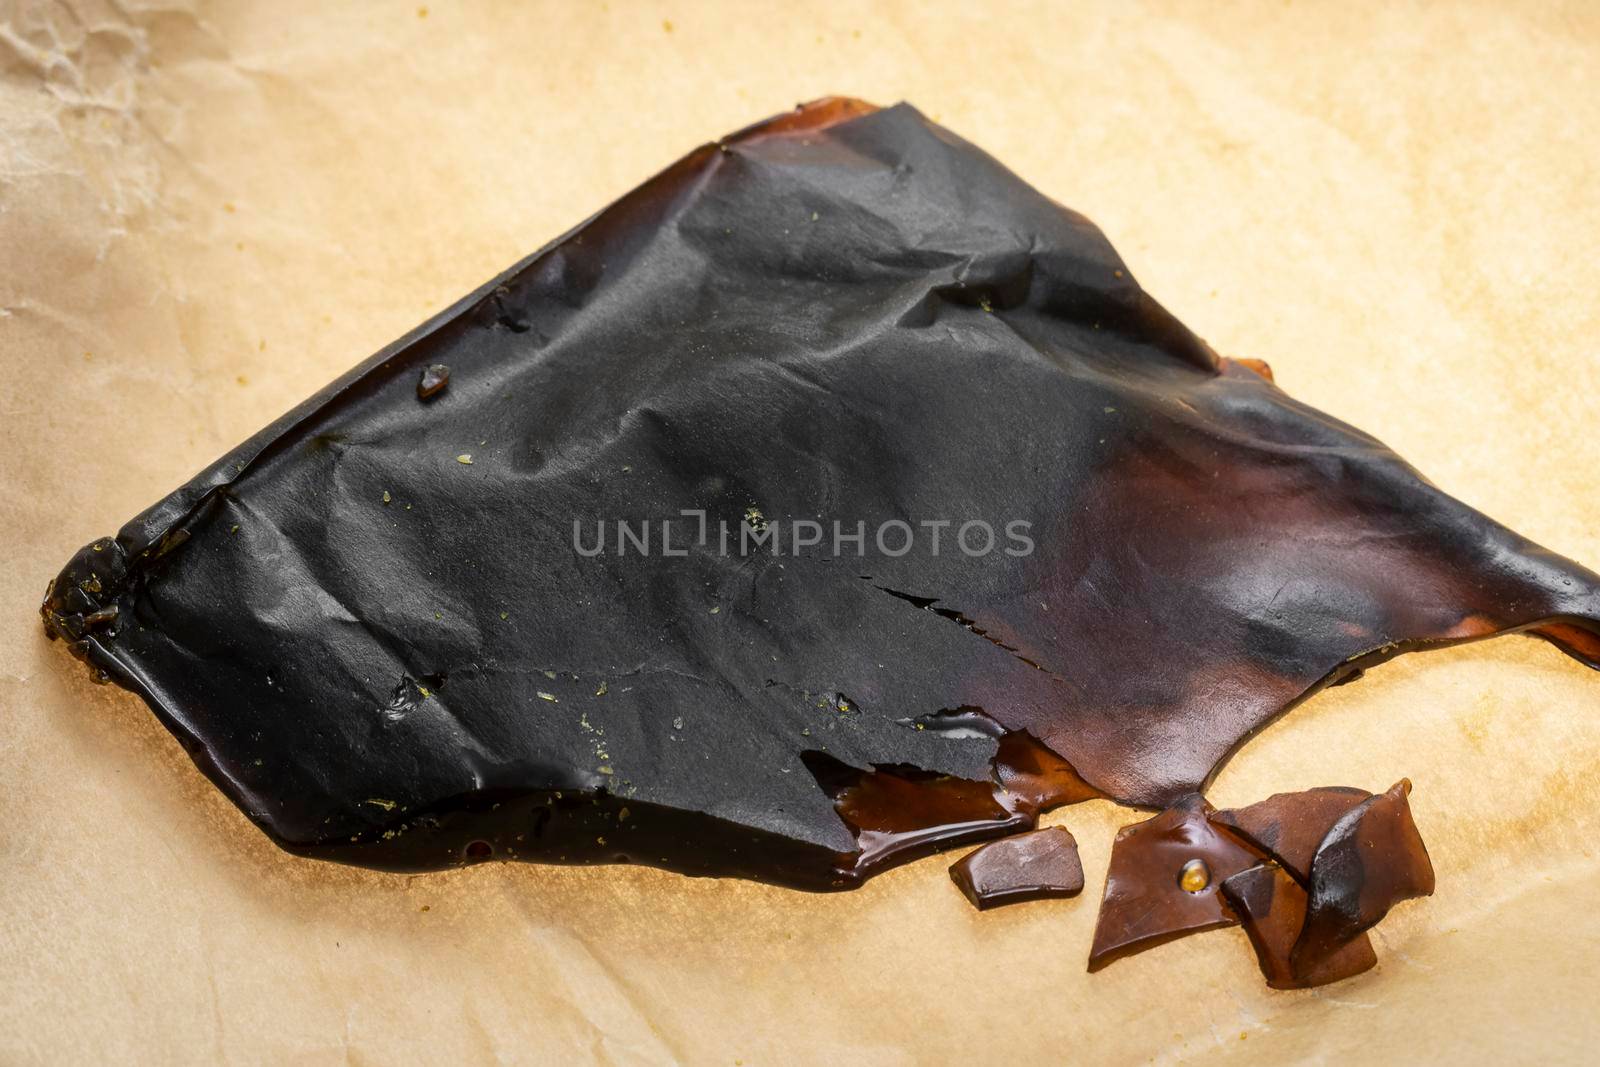 medical marijuana shatter wax processed cannabis concentrate closeup in california by jackmalipan